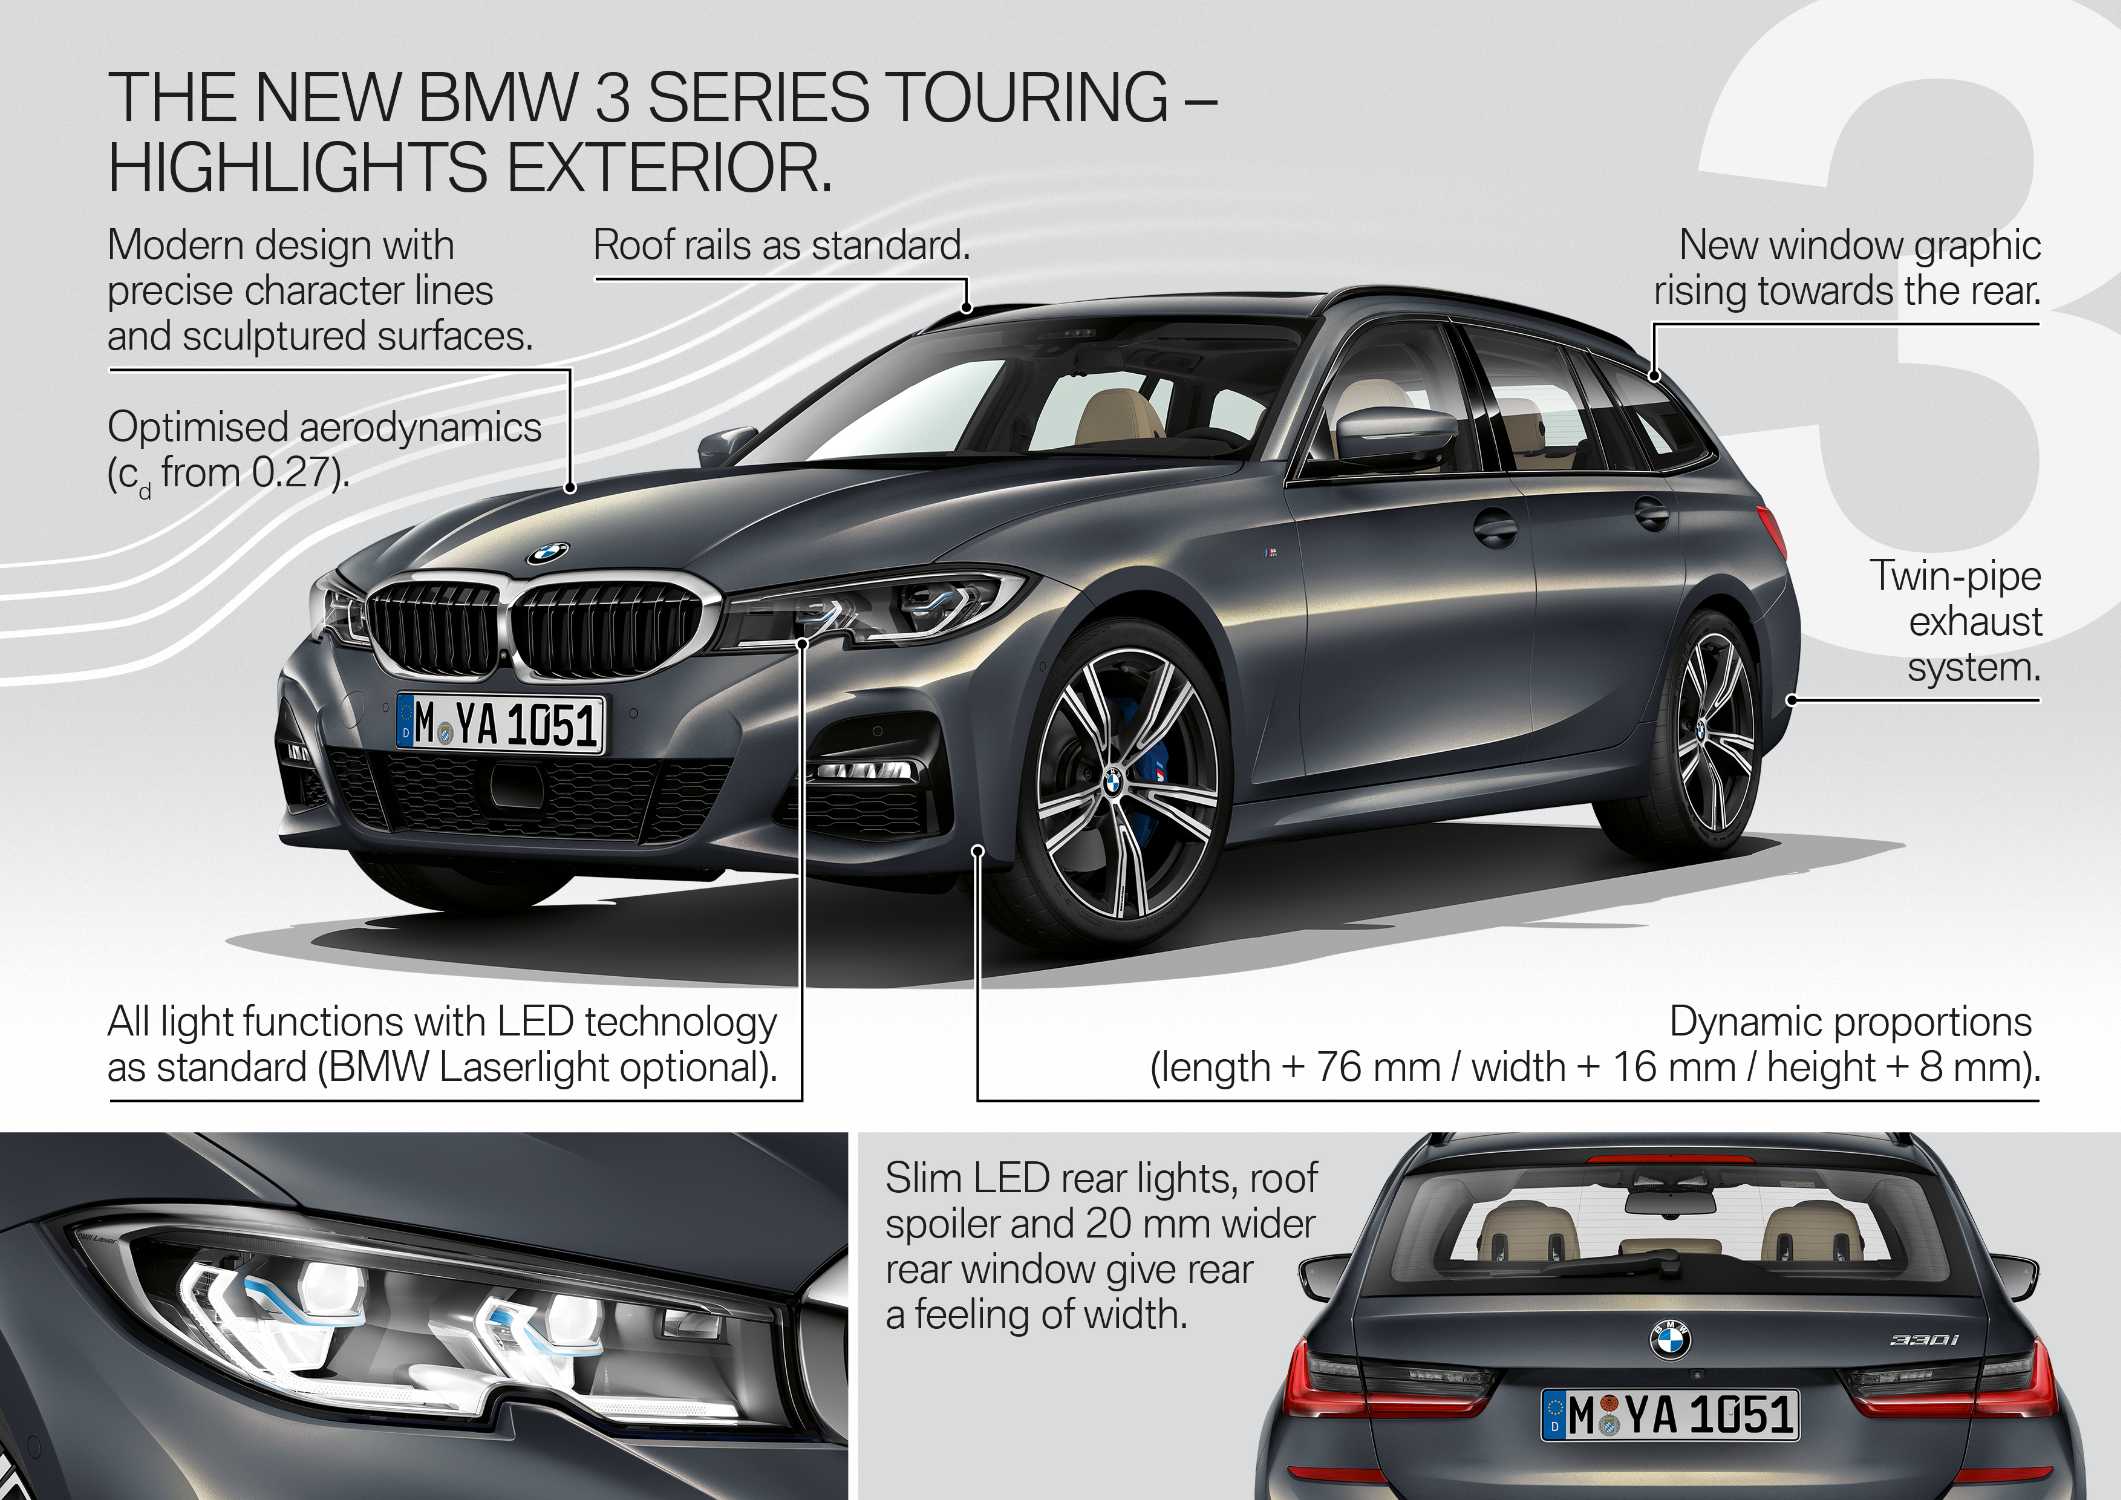 The new BMW 3 Series Touring – Product hightlights (06/2019).